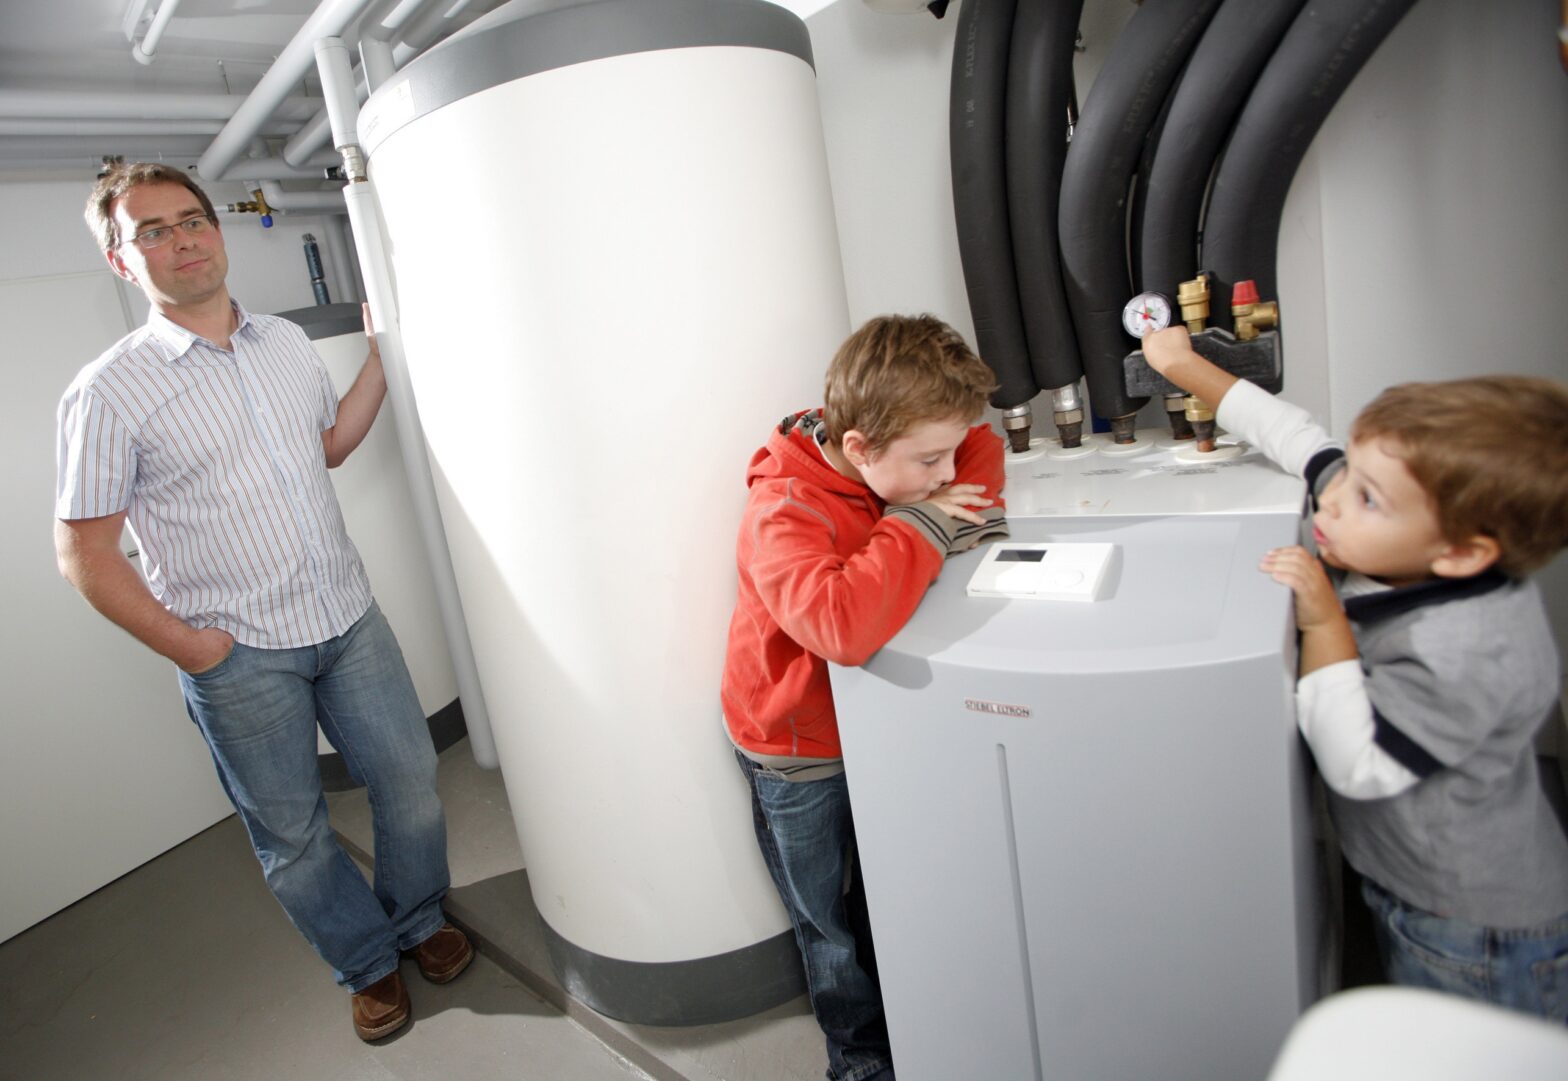 A familiy looking at a heat pump, from Global Energy Systems from https://pixabay.com//